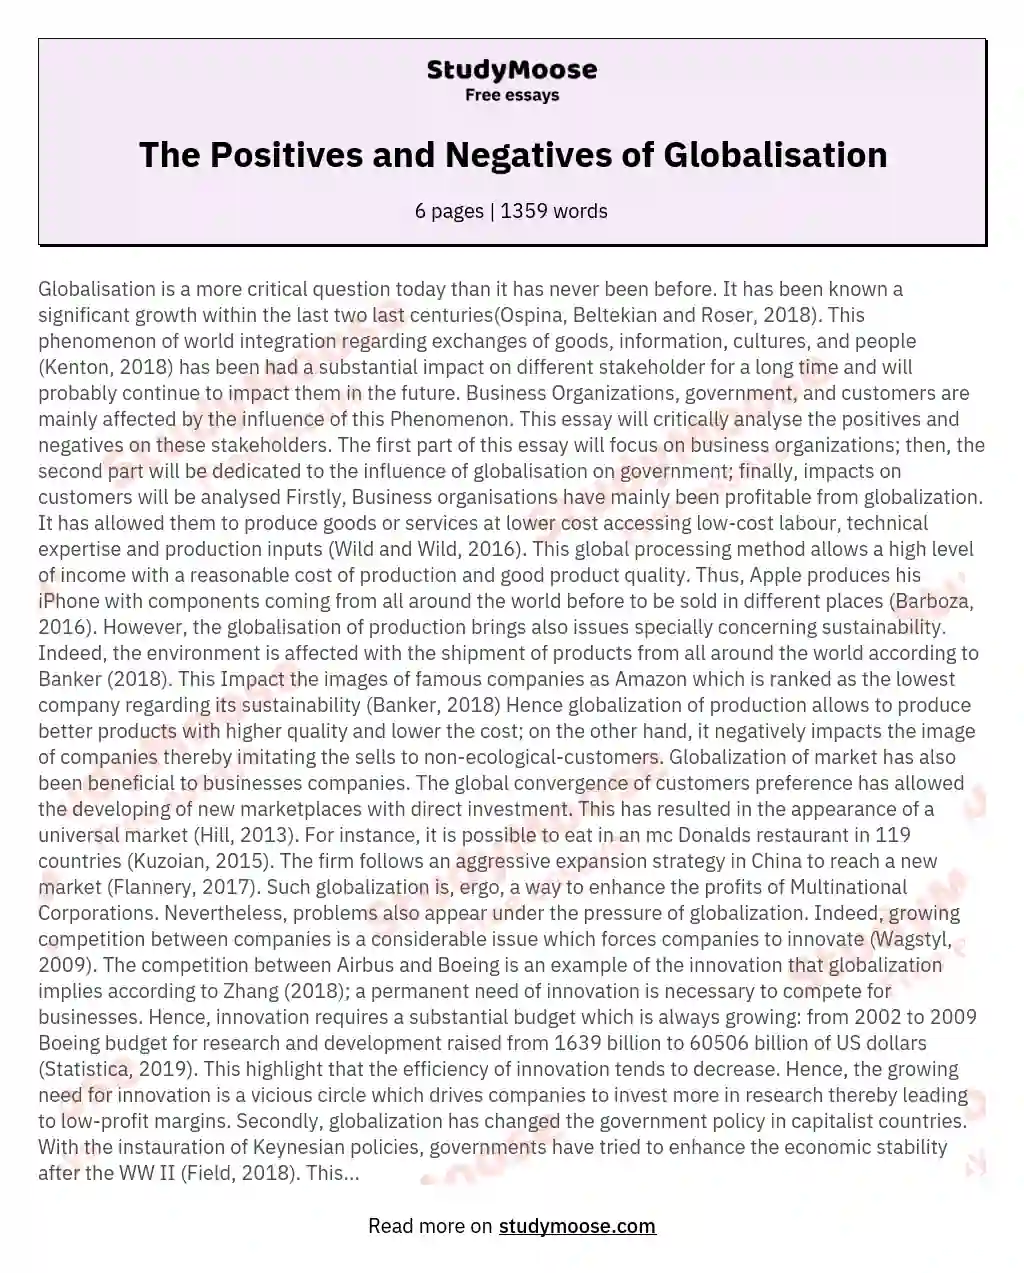 The Positives and Negatives of Globalisation essay